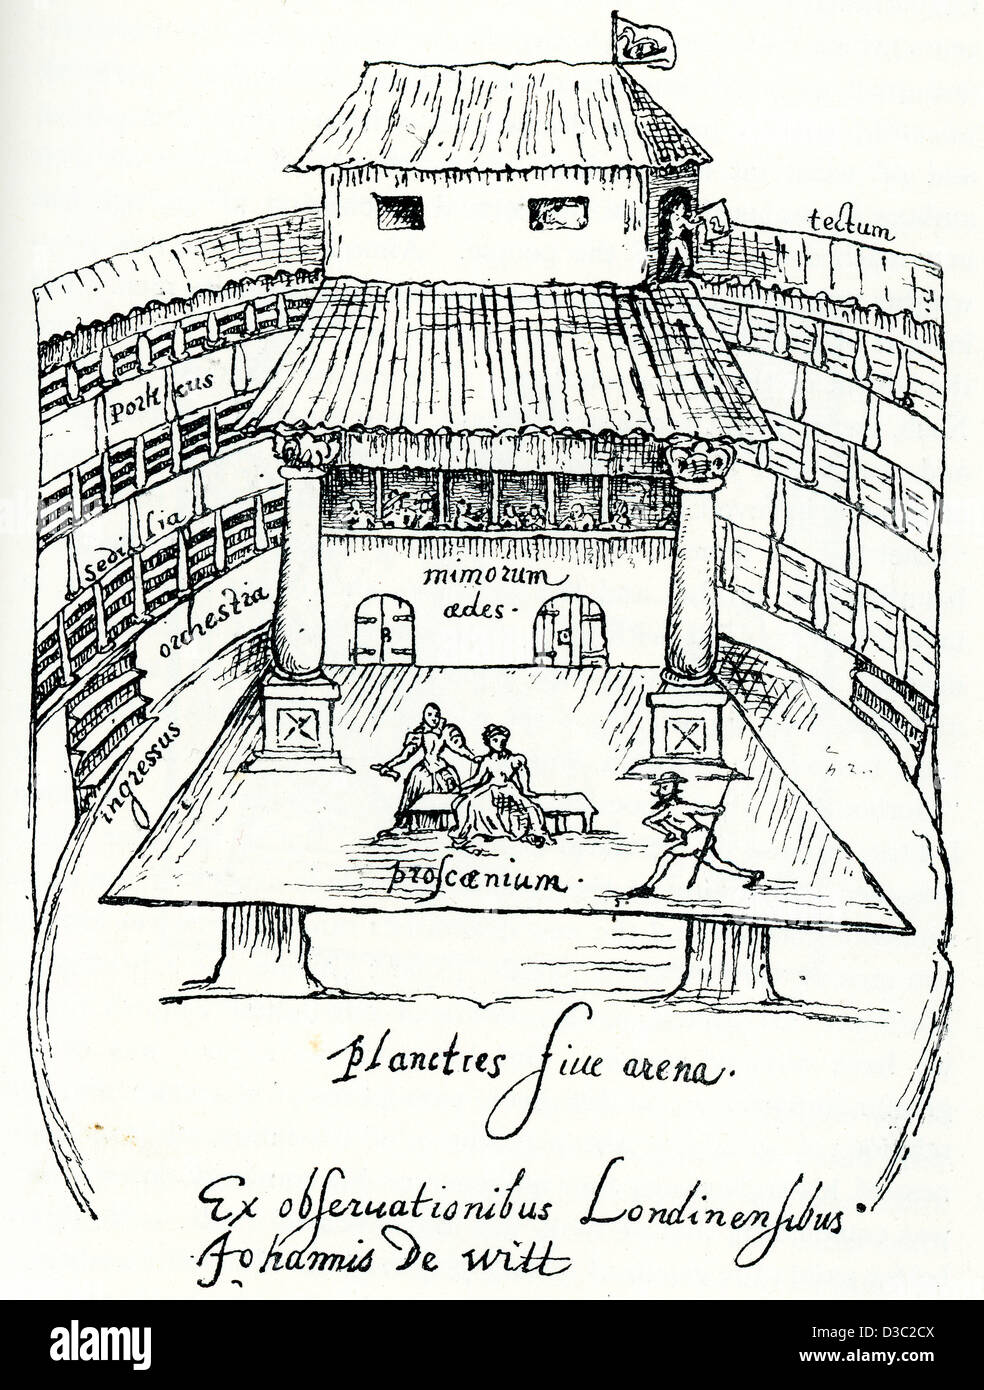 Vintage engraving of The Swan Theatre, London, 1596 Stock Photo